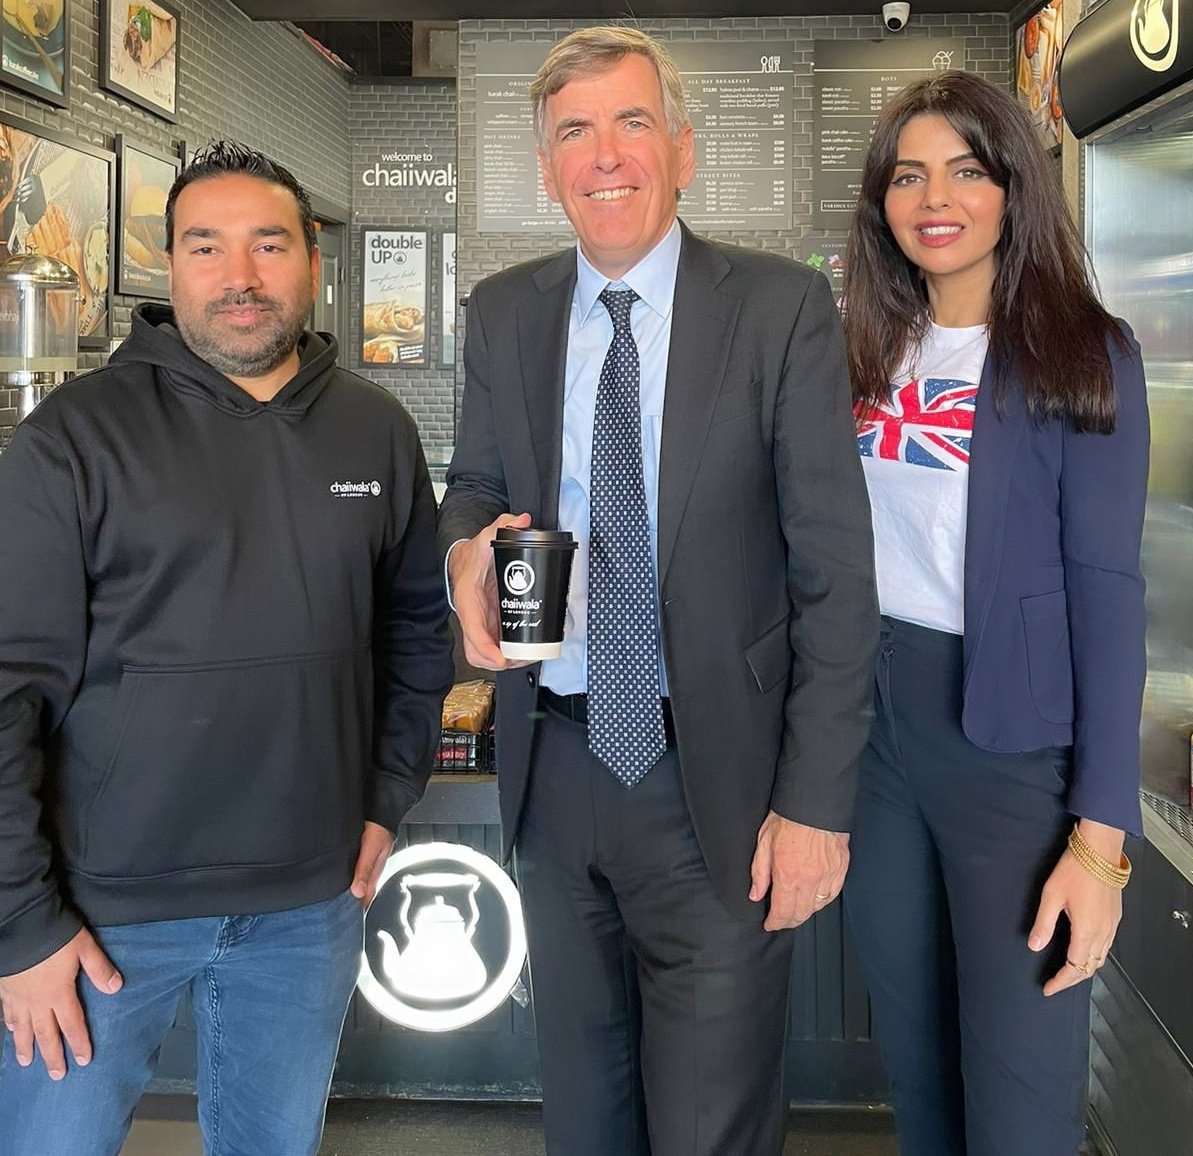 Chaiiwala of London's success in 🇨🇦continues! Uniting us across the pond with our ❤️ for a good cup of chai ☕ Lovely to visit them in Mississauga with Minister @DavidRutley recently 🫶 They will open a branch in Brampton soon. See you there! @patrickbrownont @chaiiwala